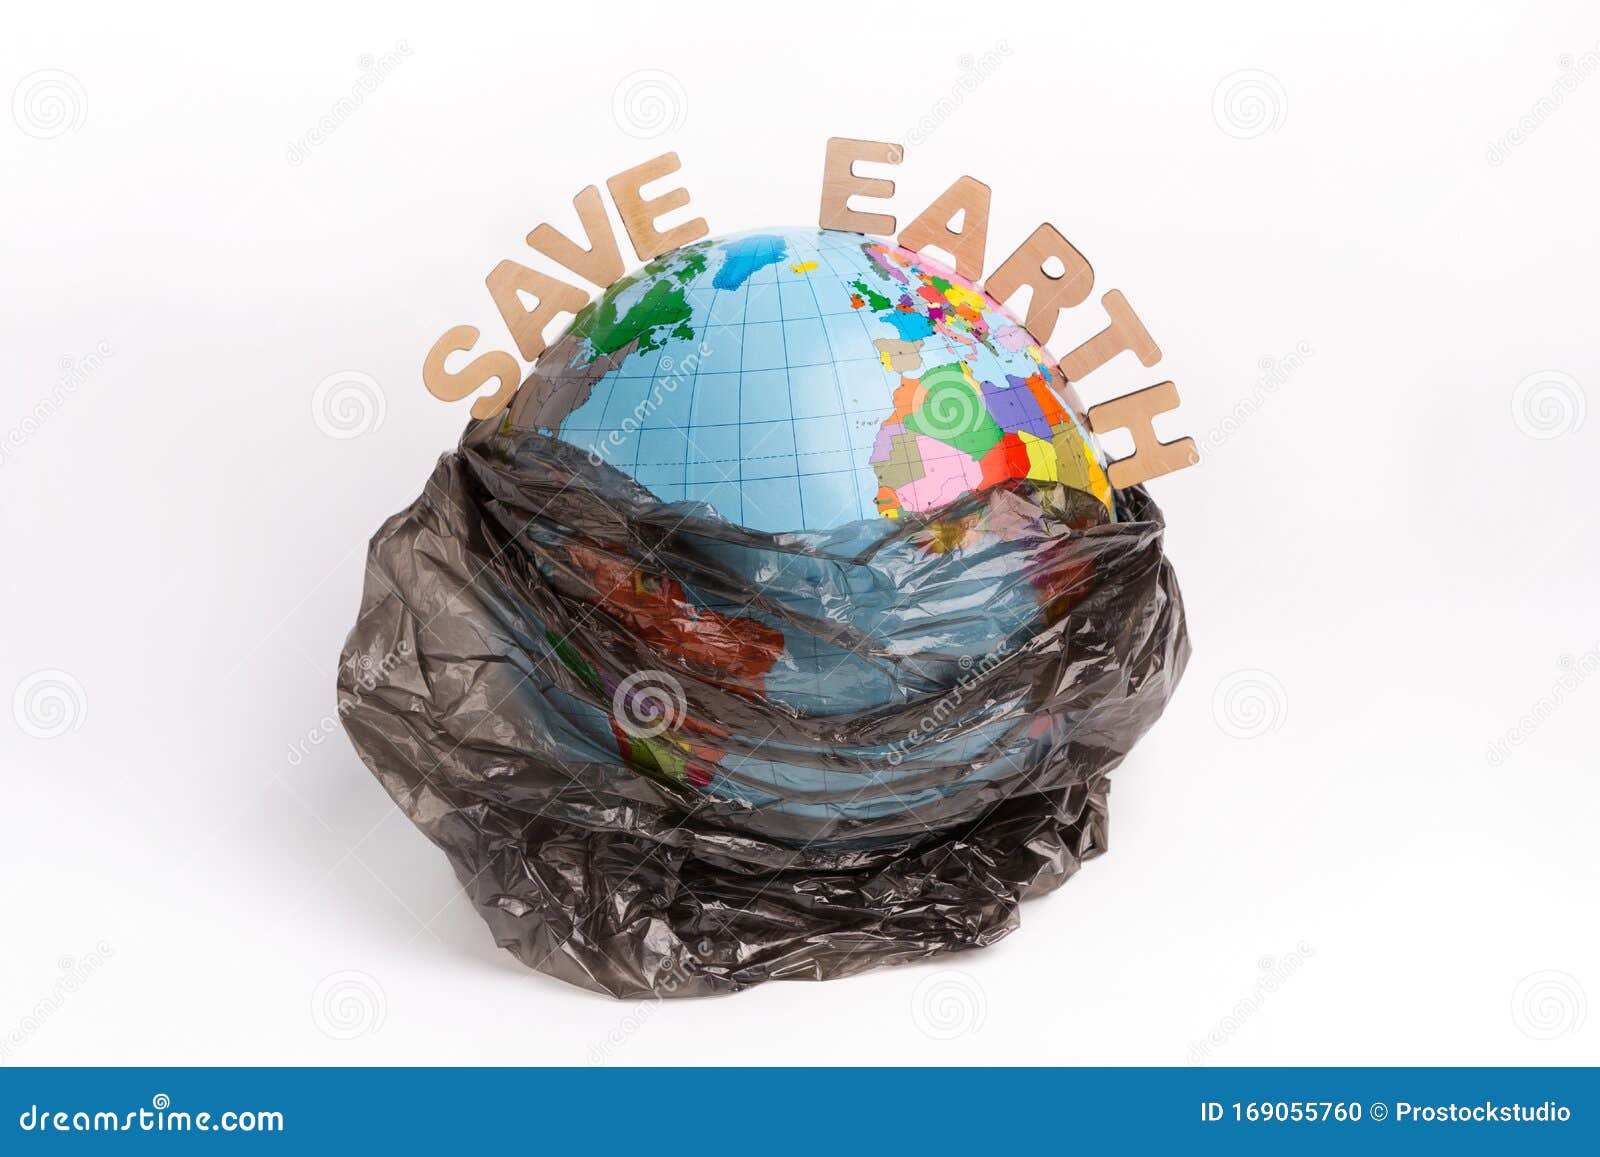 Save the Earth Text and Globe in Plastic Bag Isolated on White ...